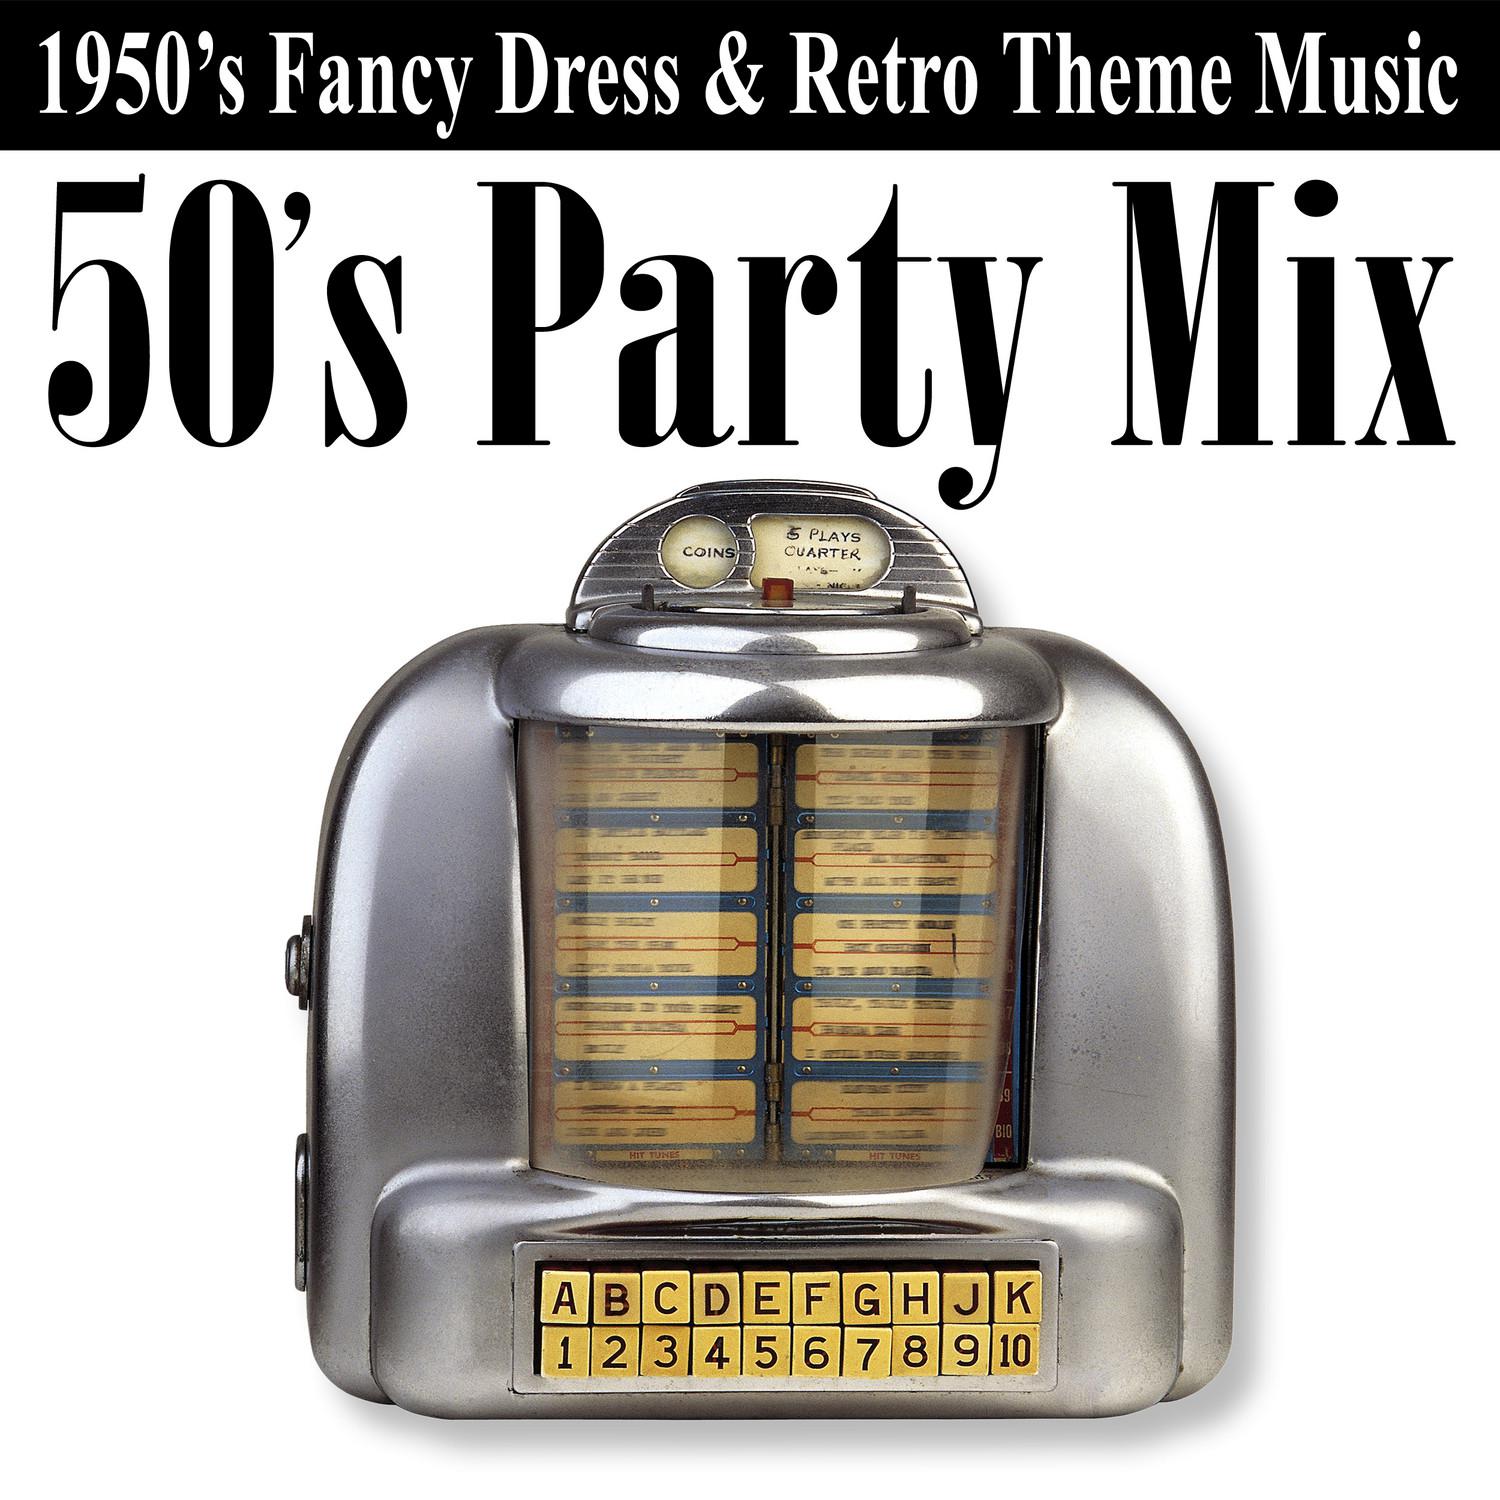 Dream Boat (50's Party Mix)